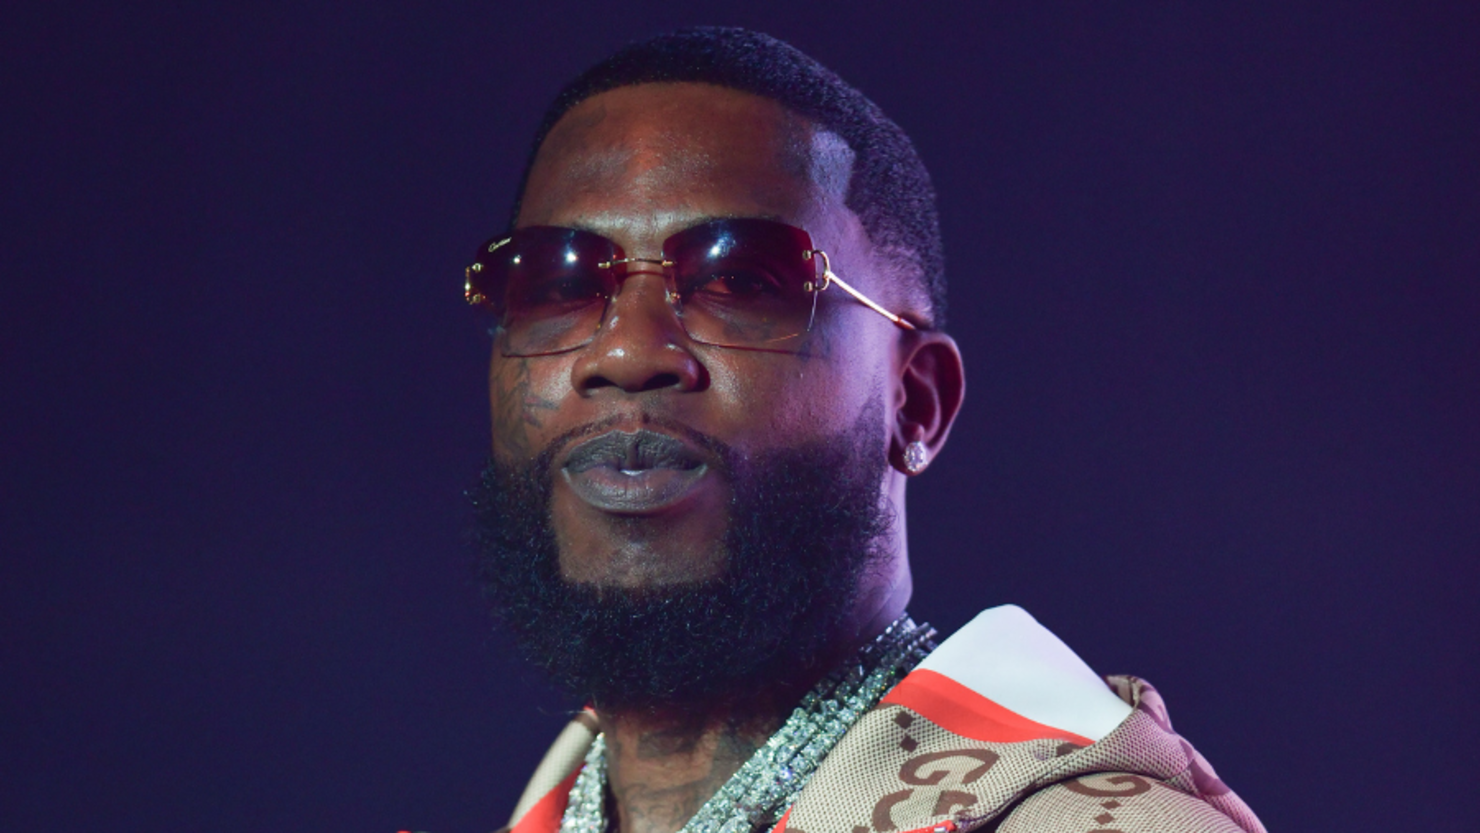 Gucci Mane's Beard Is Extremely Advanced